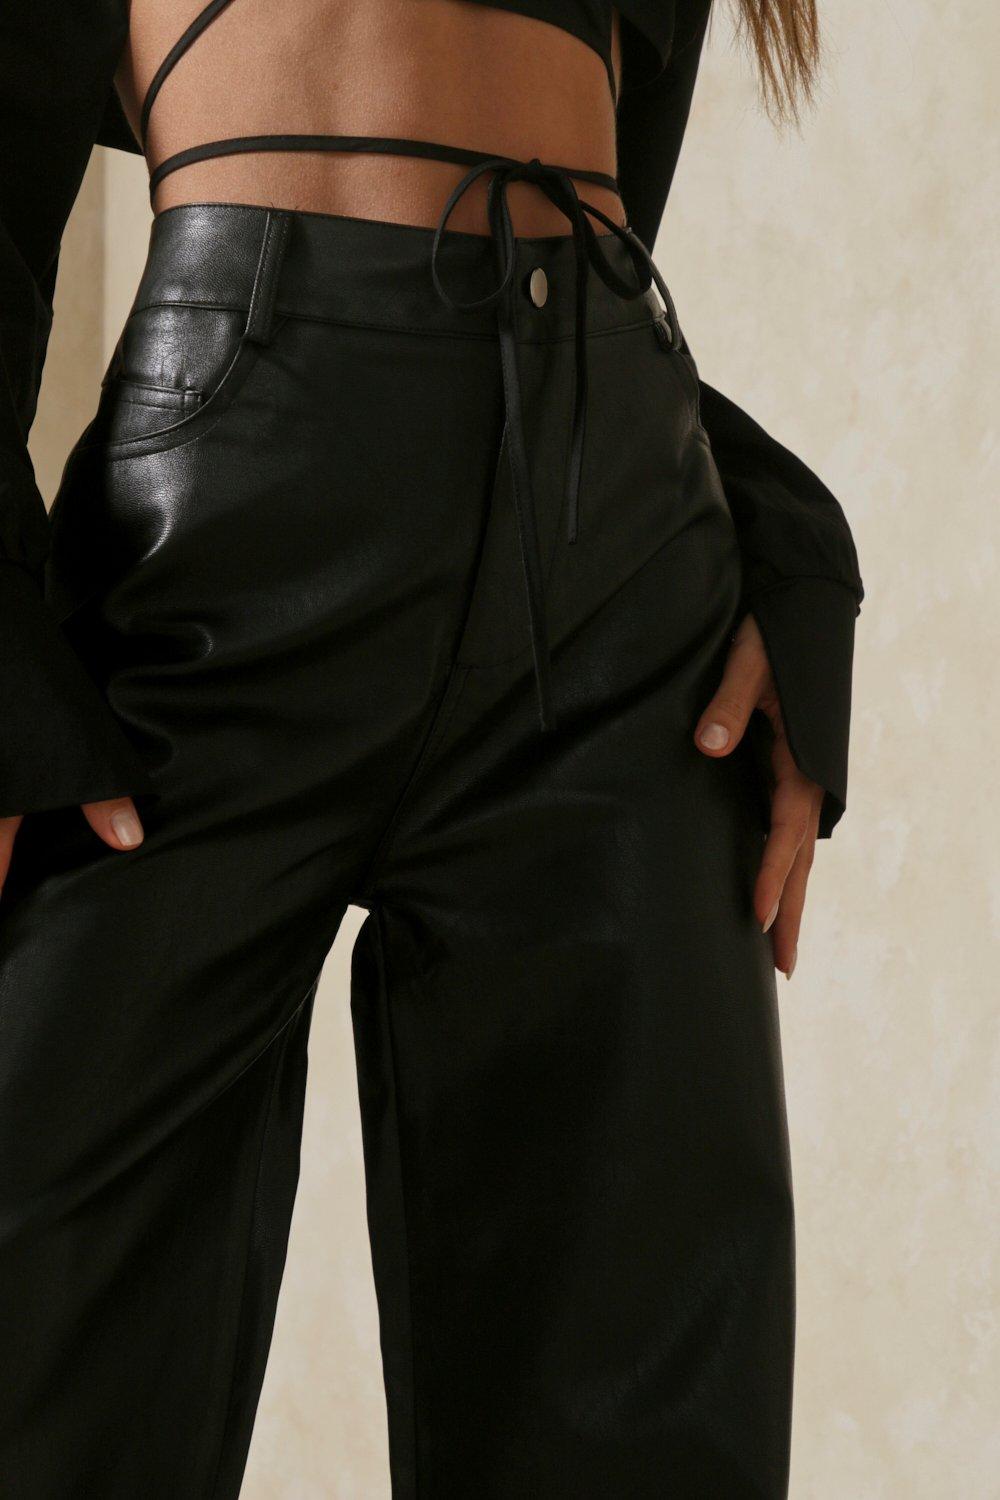 Black Leather Pants To Wear This Fall 2019 | Leather pants style, Black  leather pants, Fashion pants